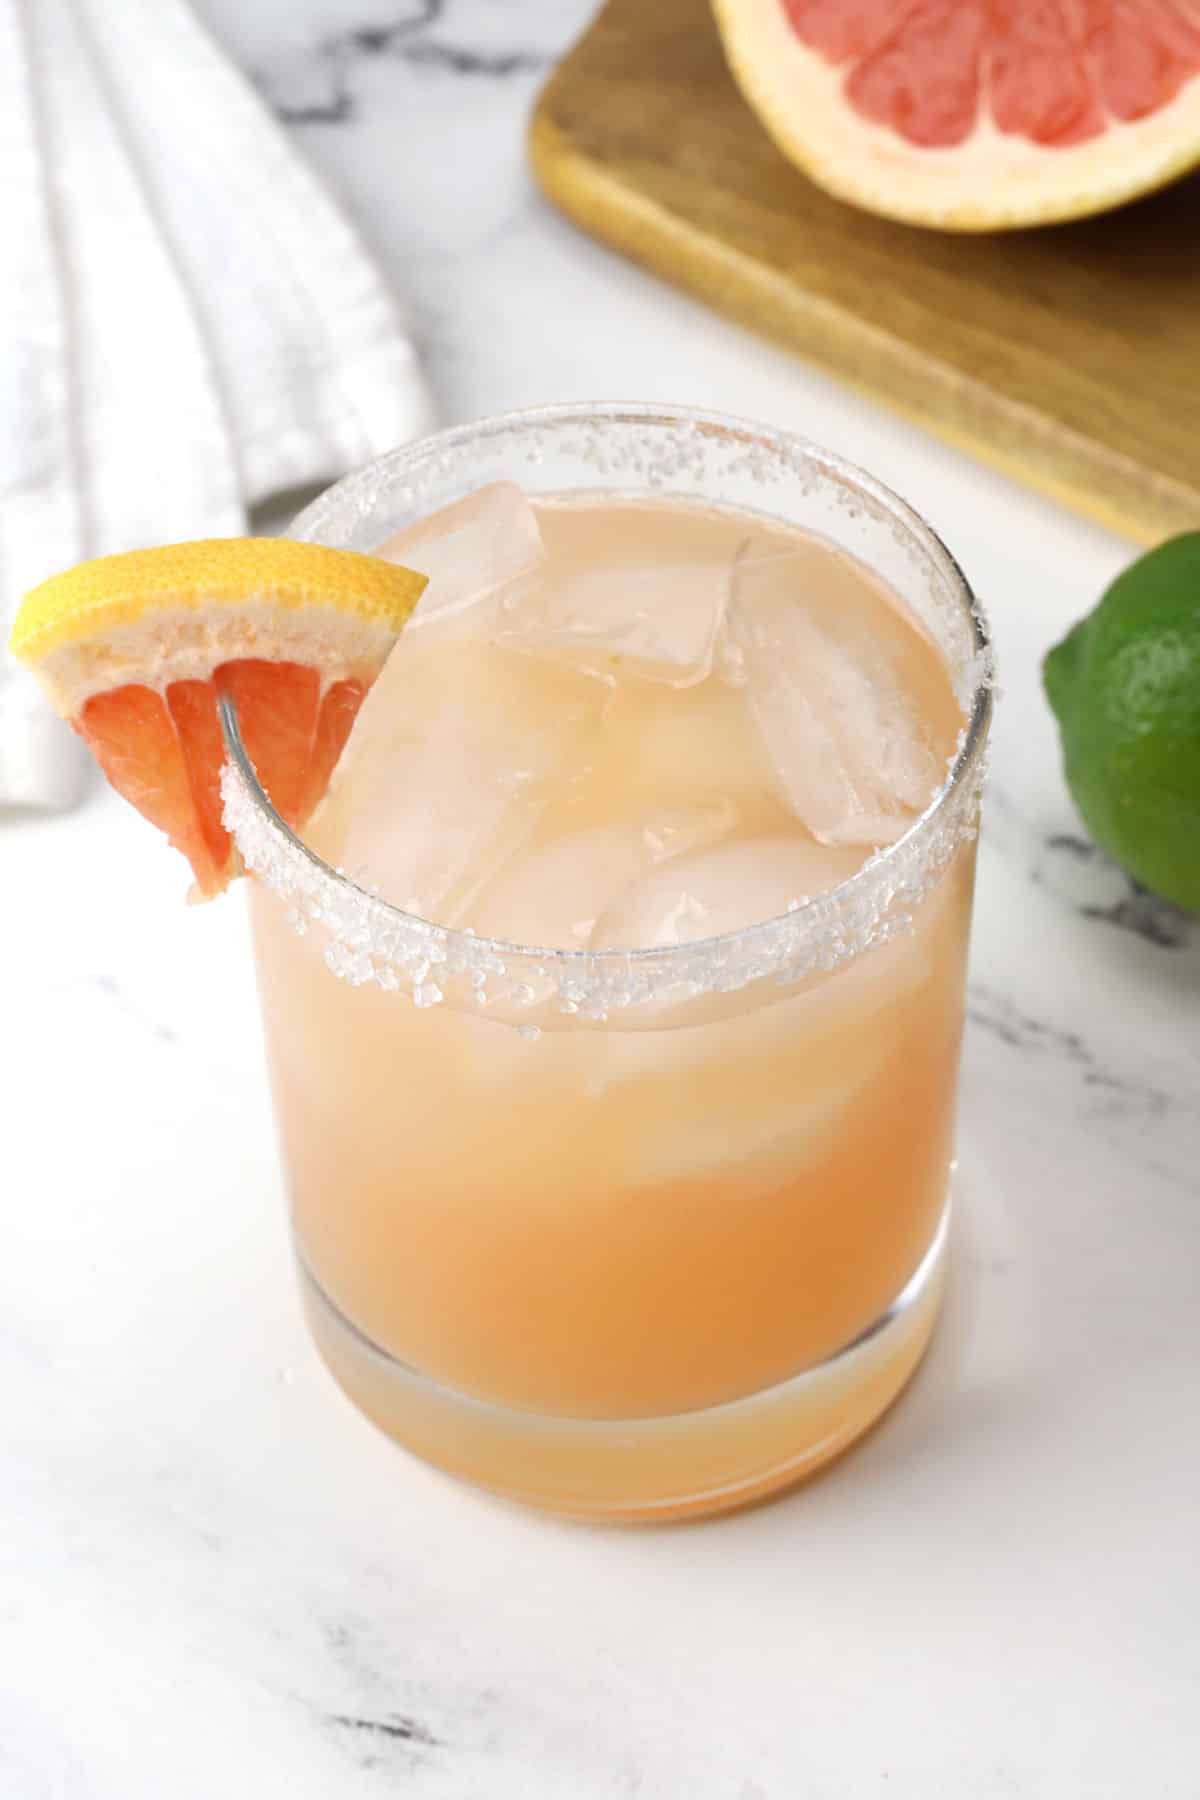 Overhead closeup view of a grapefruit margarita with a salted rim and wedge of grapefruit.